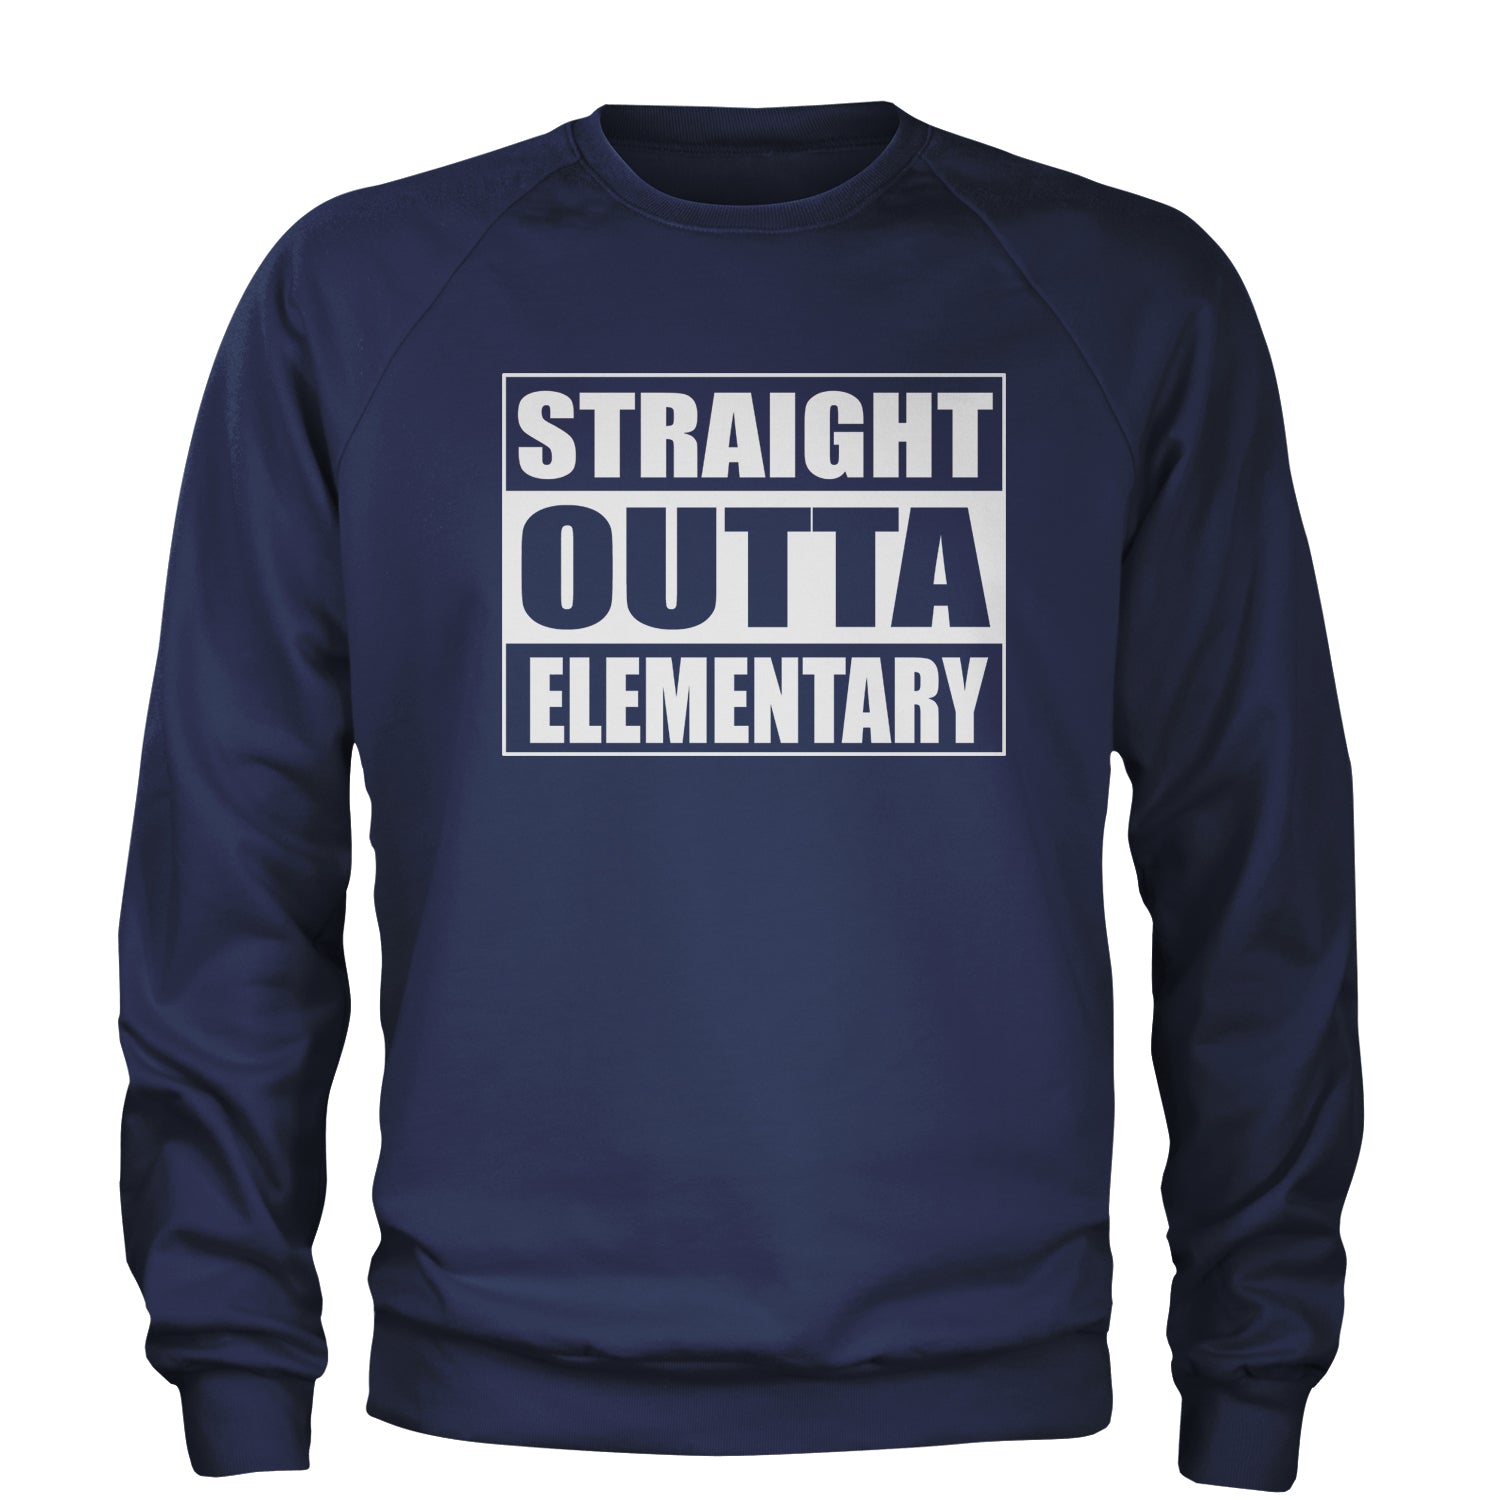 Straight Outta Elementary Adult Crewneck Sweatshirt 2020, 2021, 2022, class, of, quarantine, queen by Expression Tees